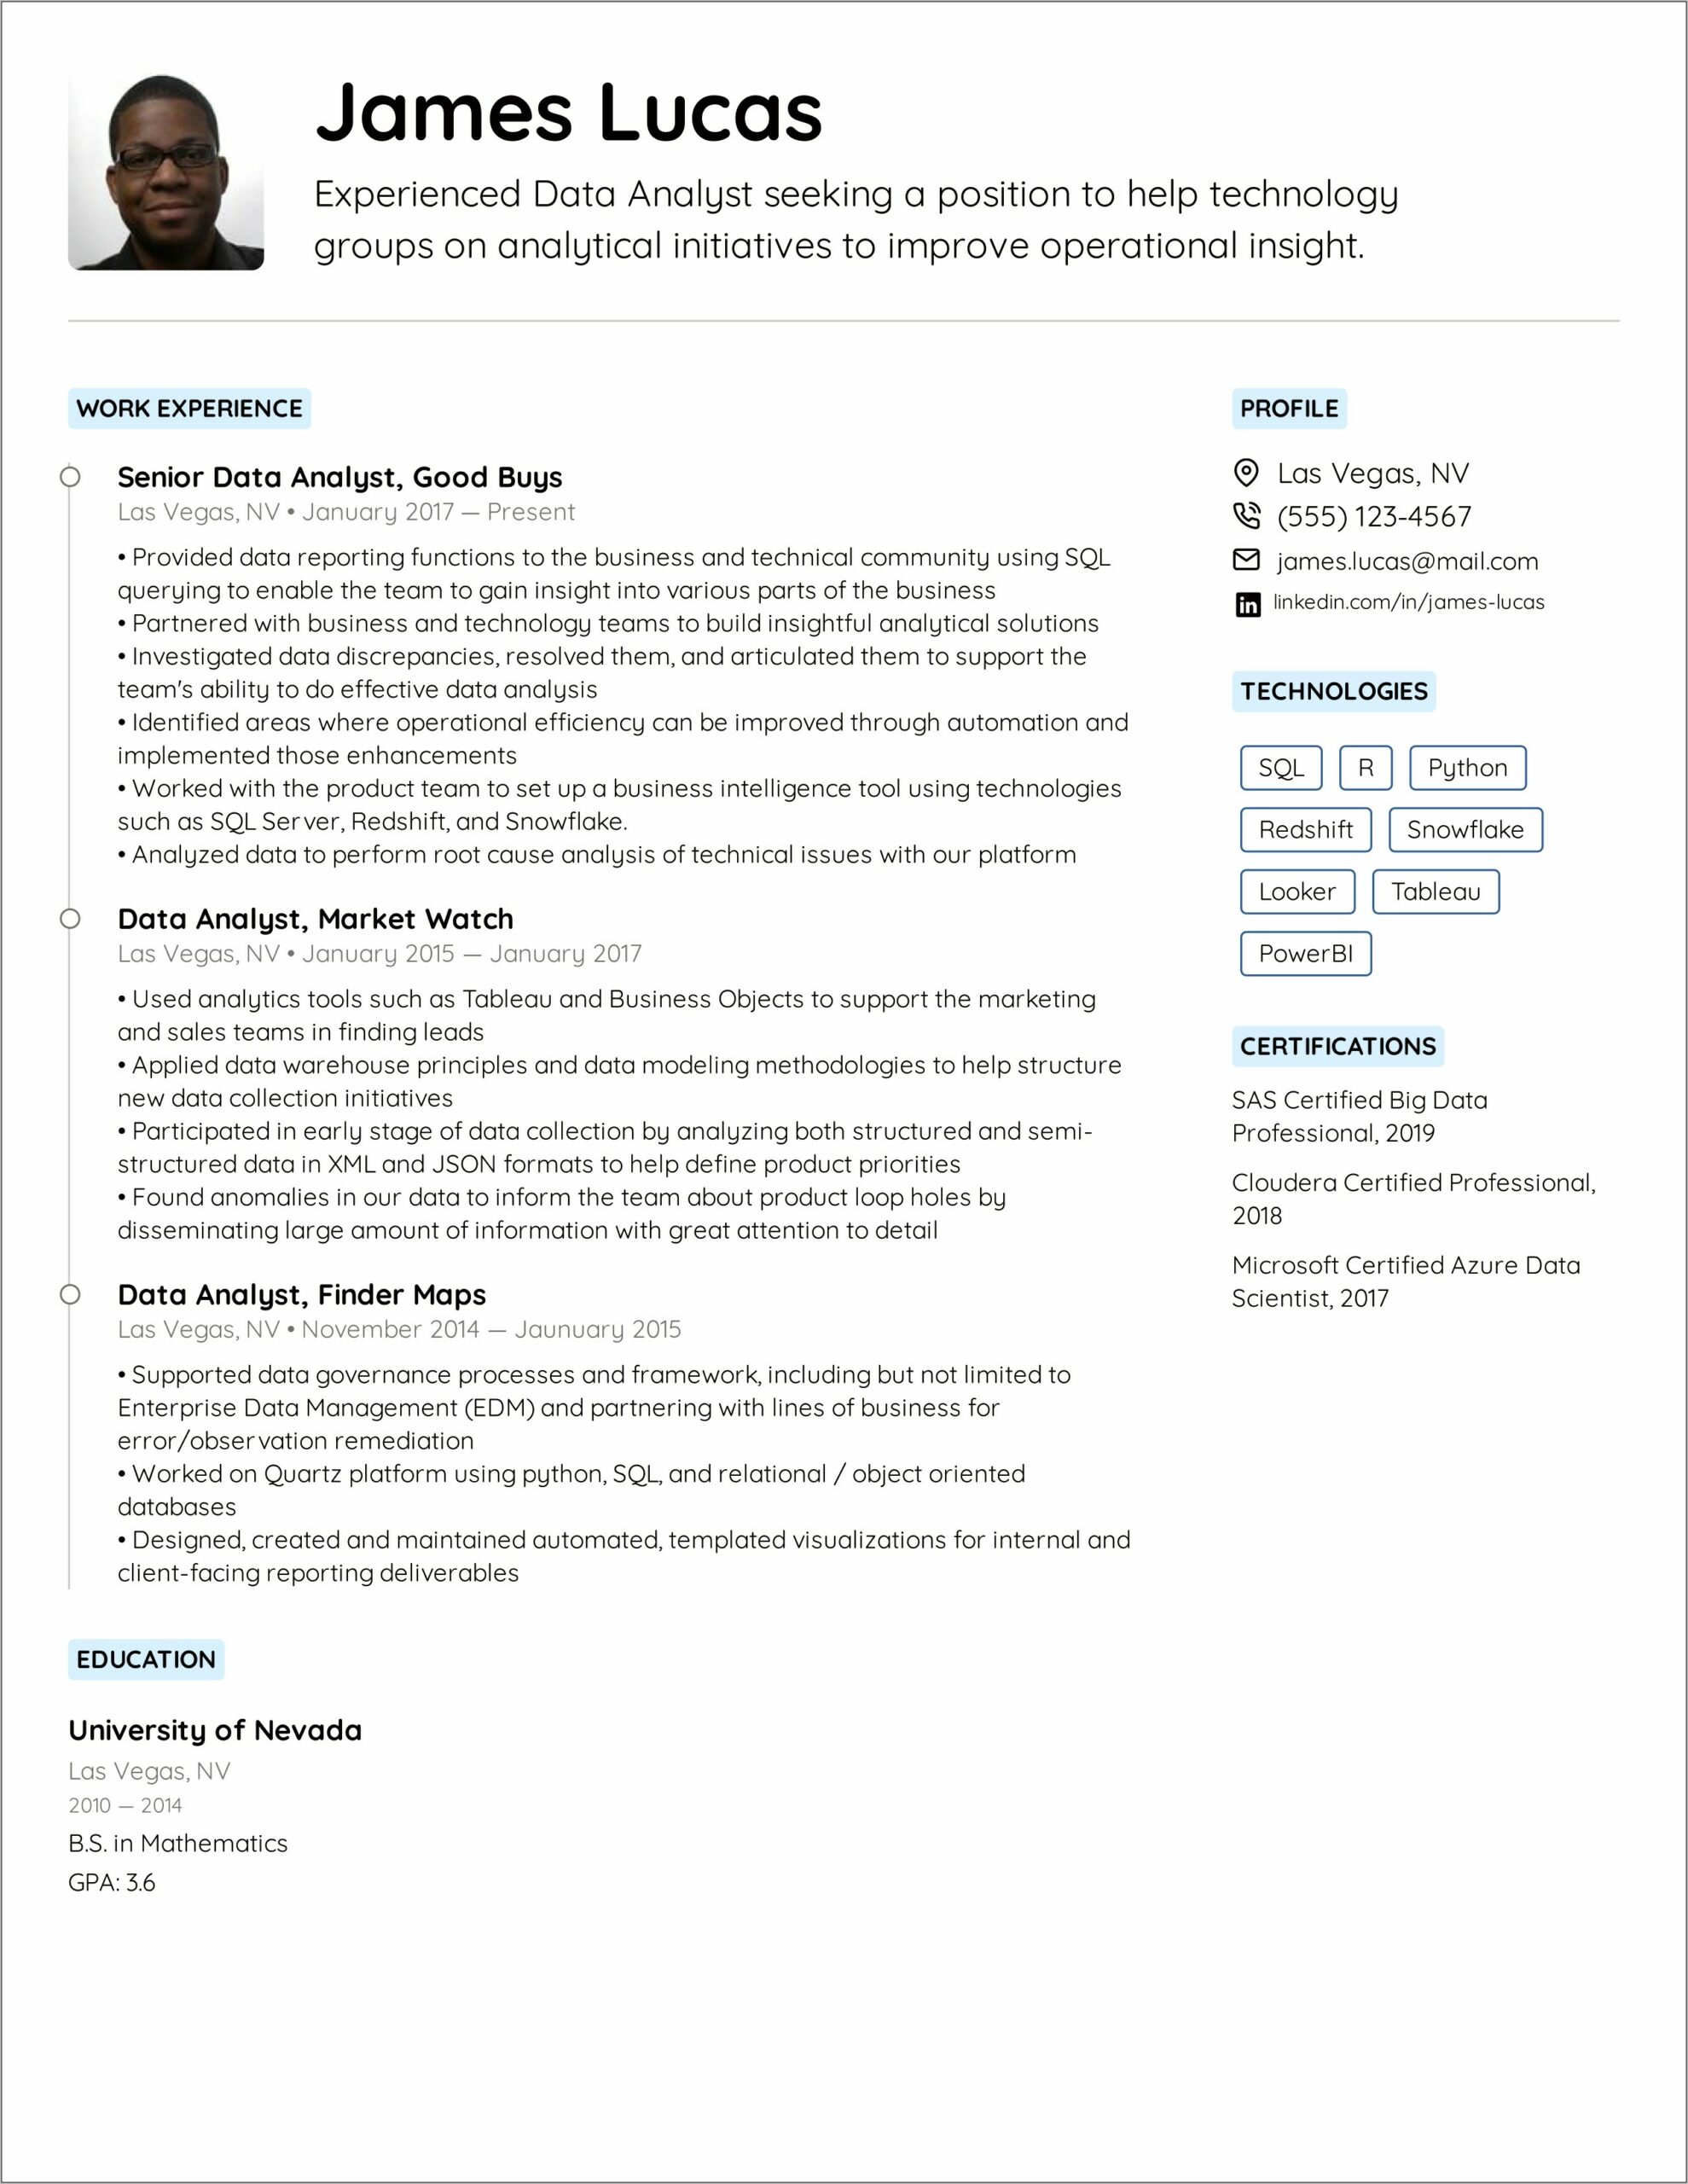 Sample Resume Objective Statement For Business Analyst